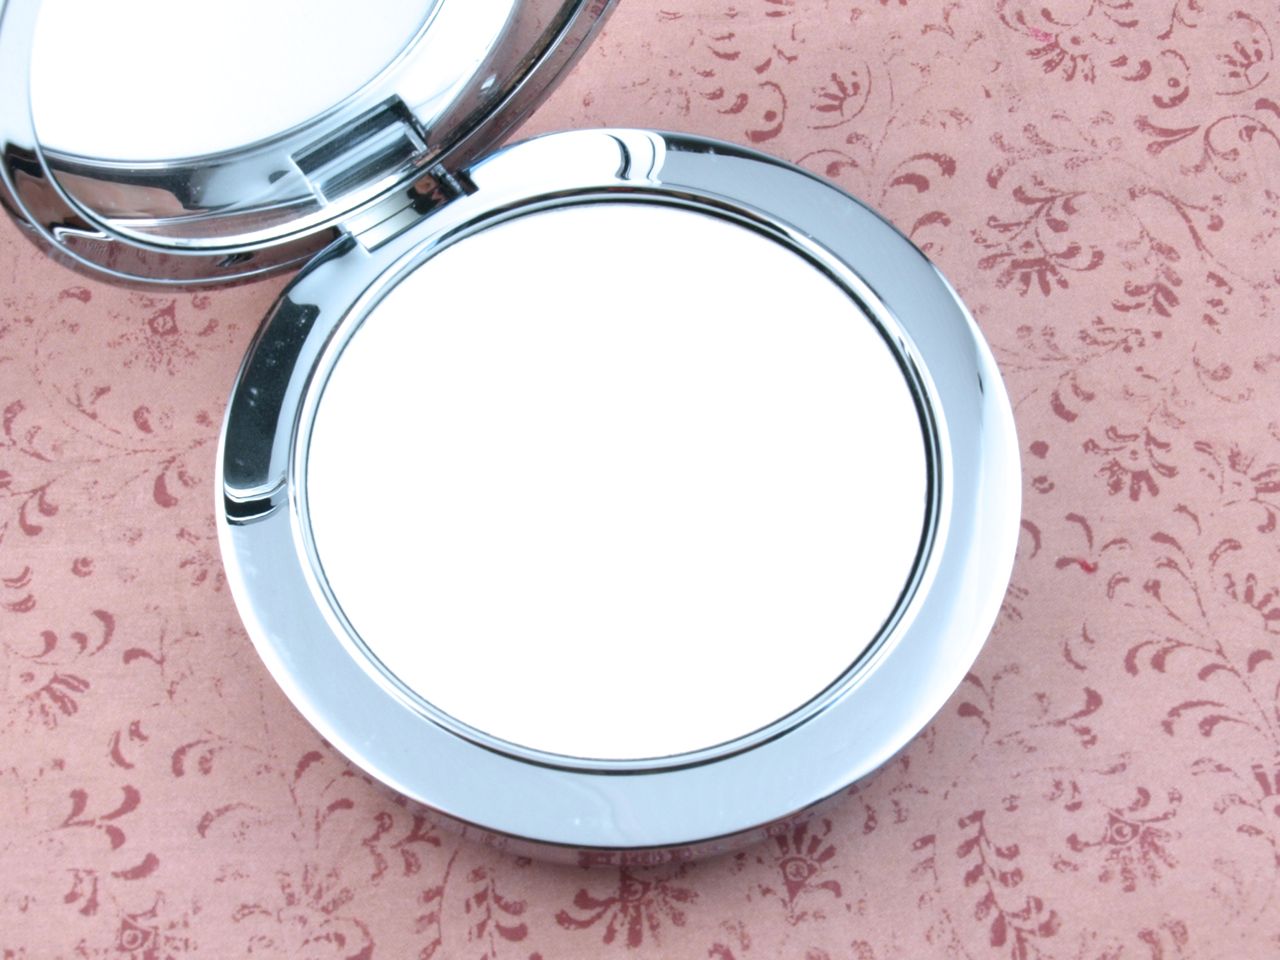 Rodial Instaglam Compact Deluxe Translucent HD Powder: Review